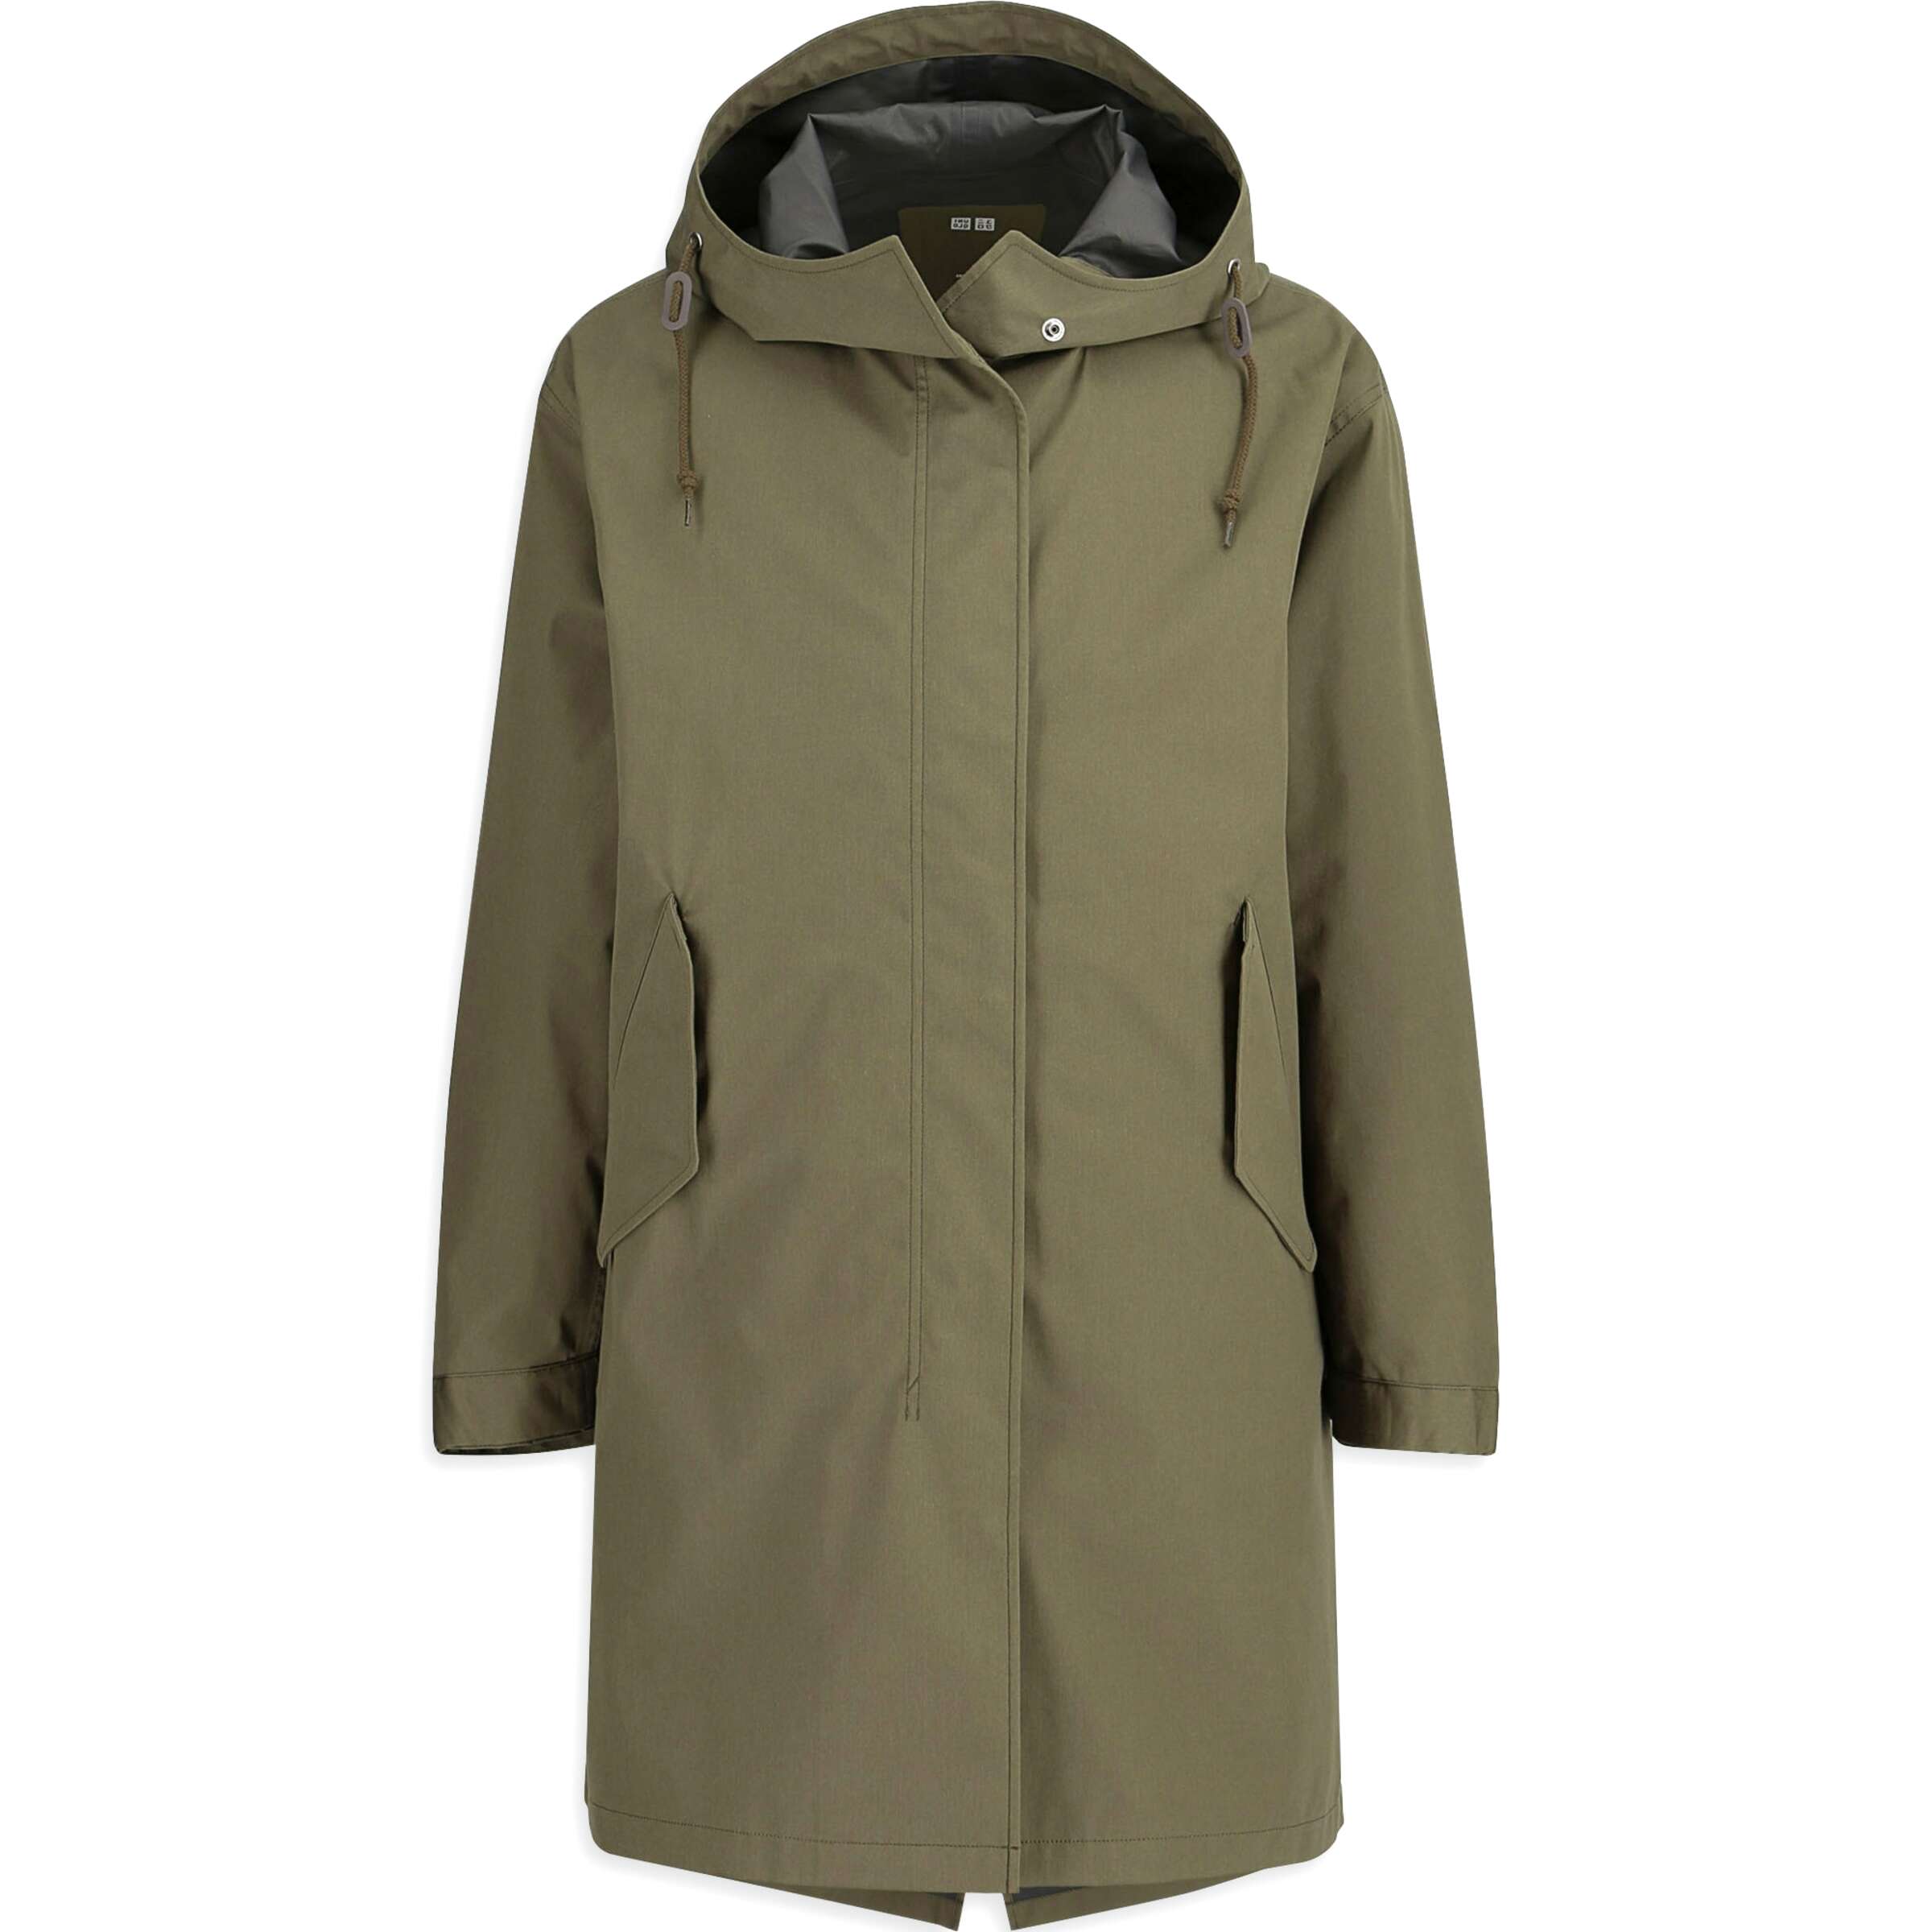 Fishtail Parka for sale in UK | 63 used Fishtail Parkas